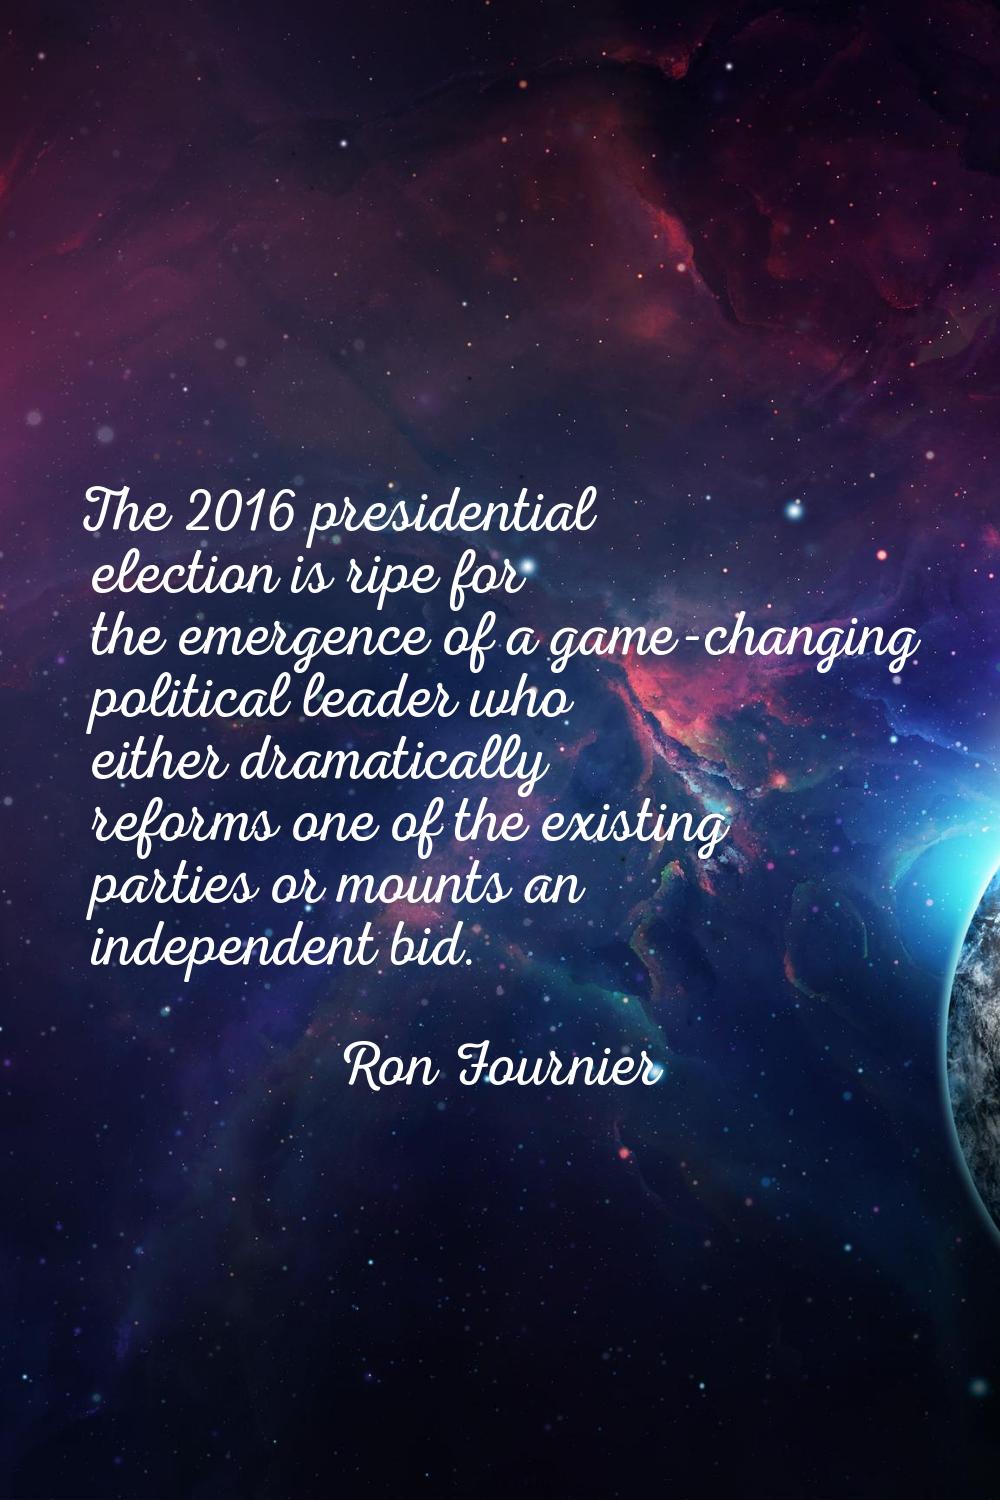 The 2016 presidential election is ripe for the emergence of a game-changing political leader who ei